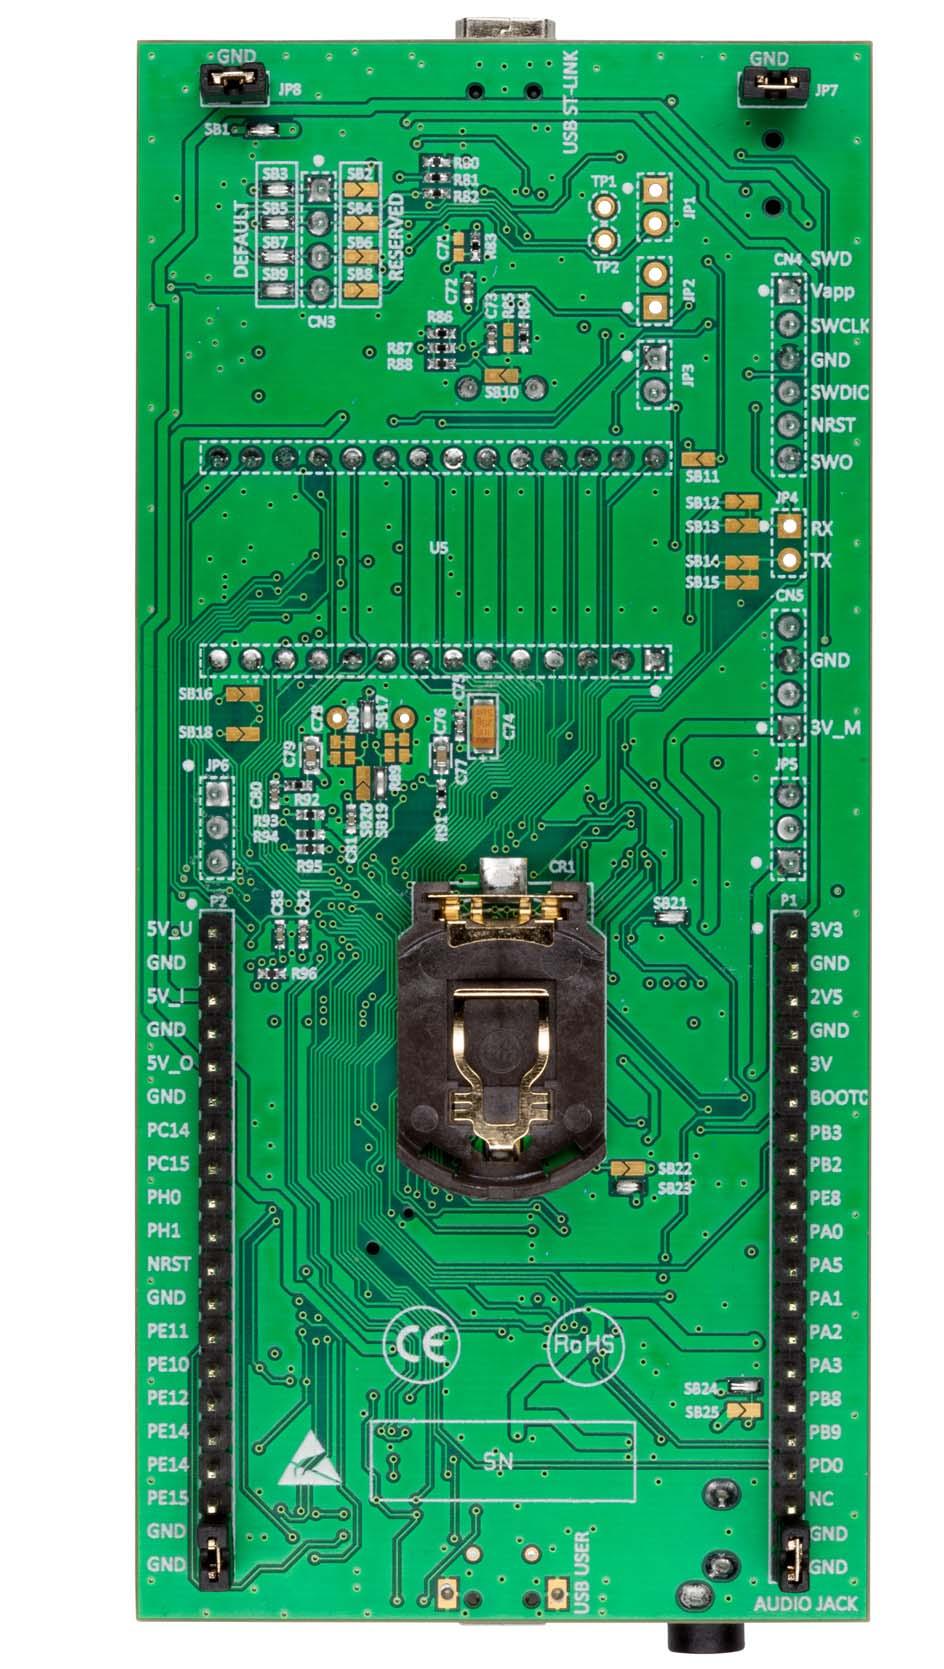 STM32L476G discovery board (top view)